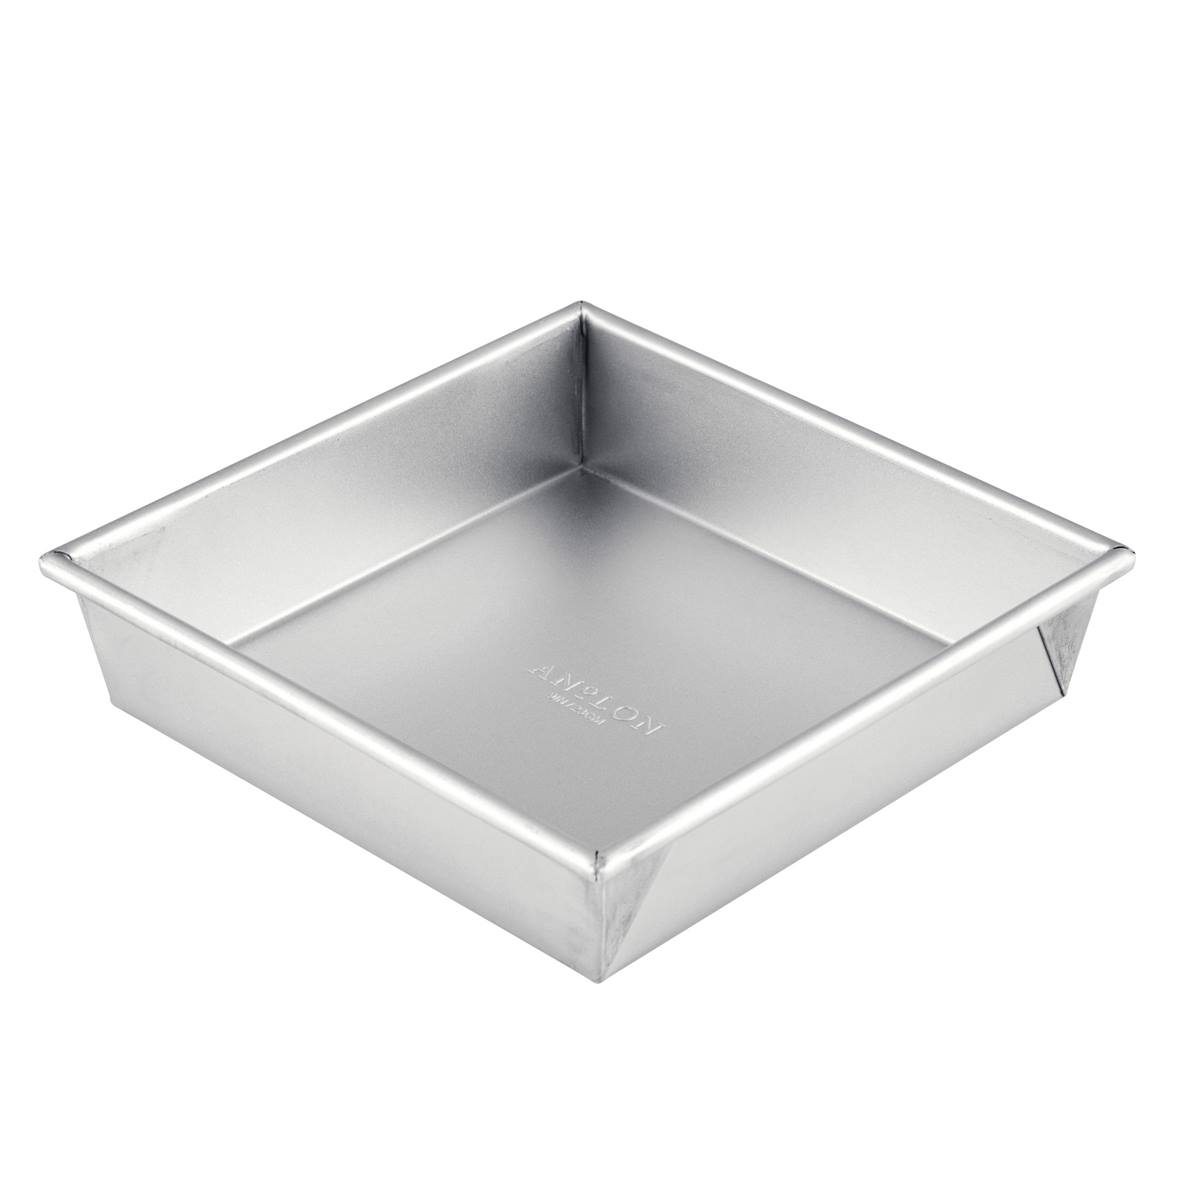 Anolon(R) Professional Bakeware 9in. Square Cake Pan